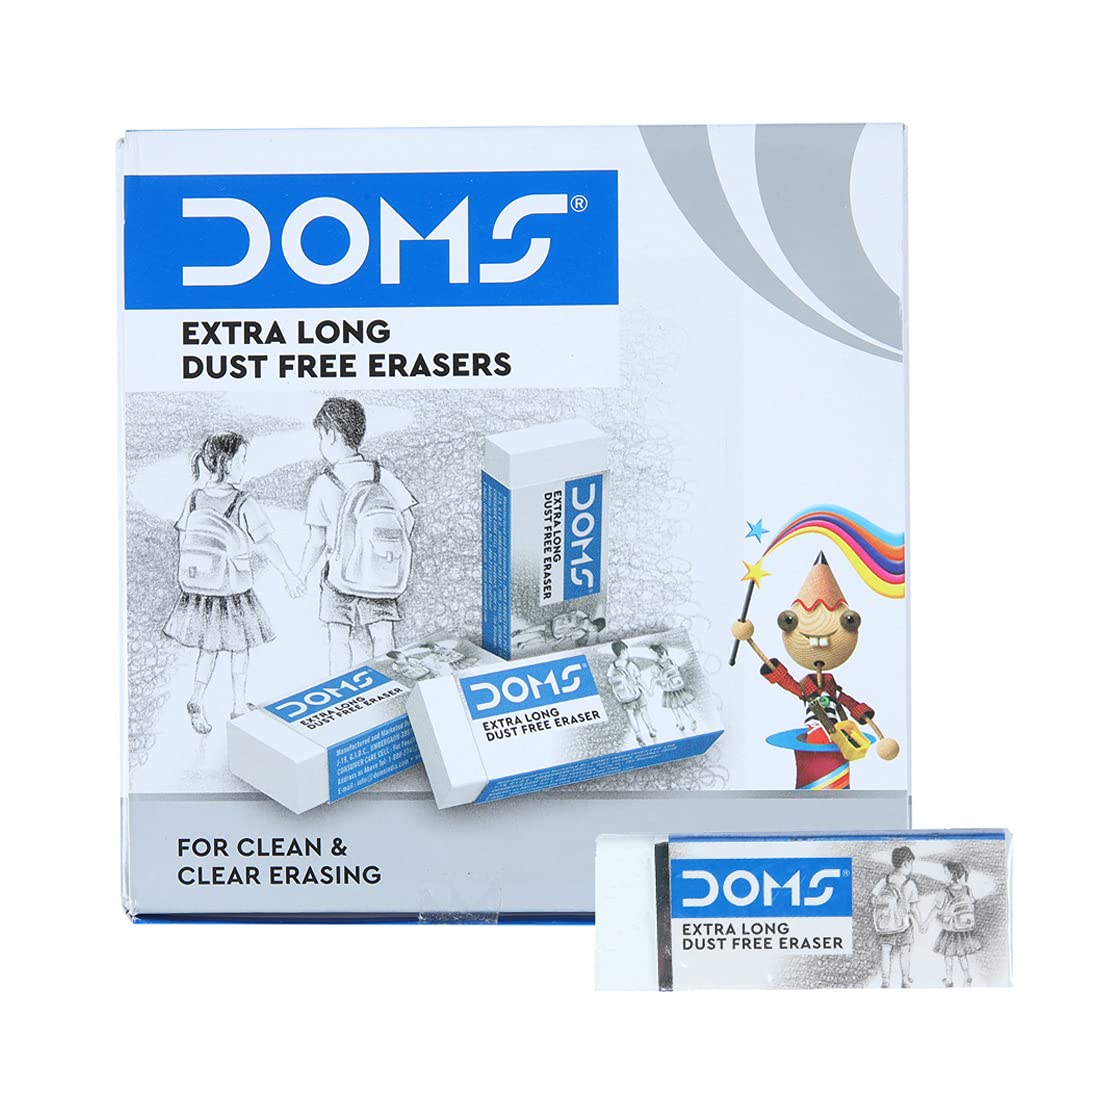 Doms Non-Toxic Dust Free Extra Long Eraser Box Pack | for Clean & Clear Erasing | Stationery Gift Item for Kids & Students | Pack of 20 Pieces